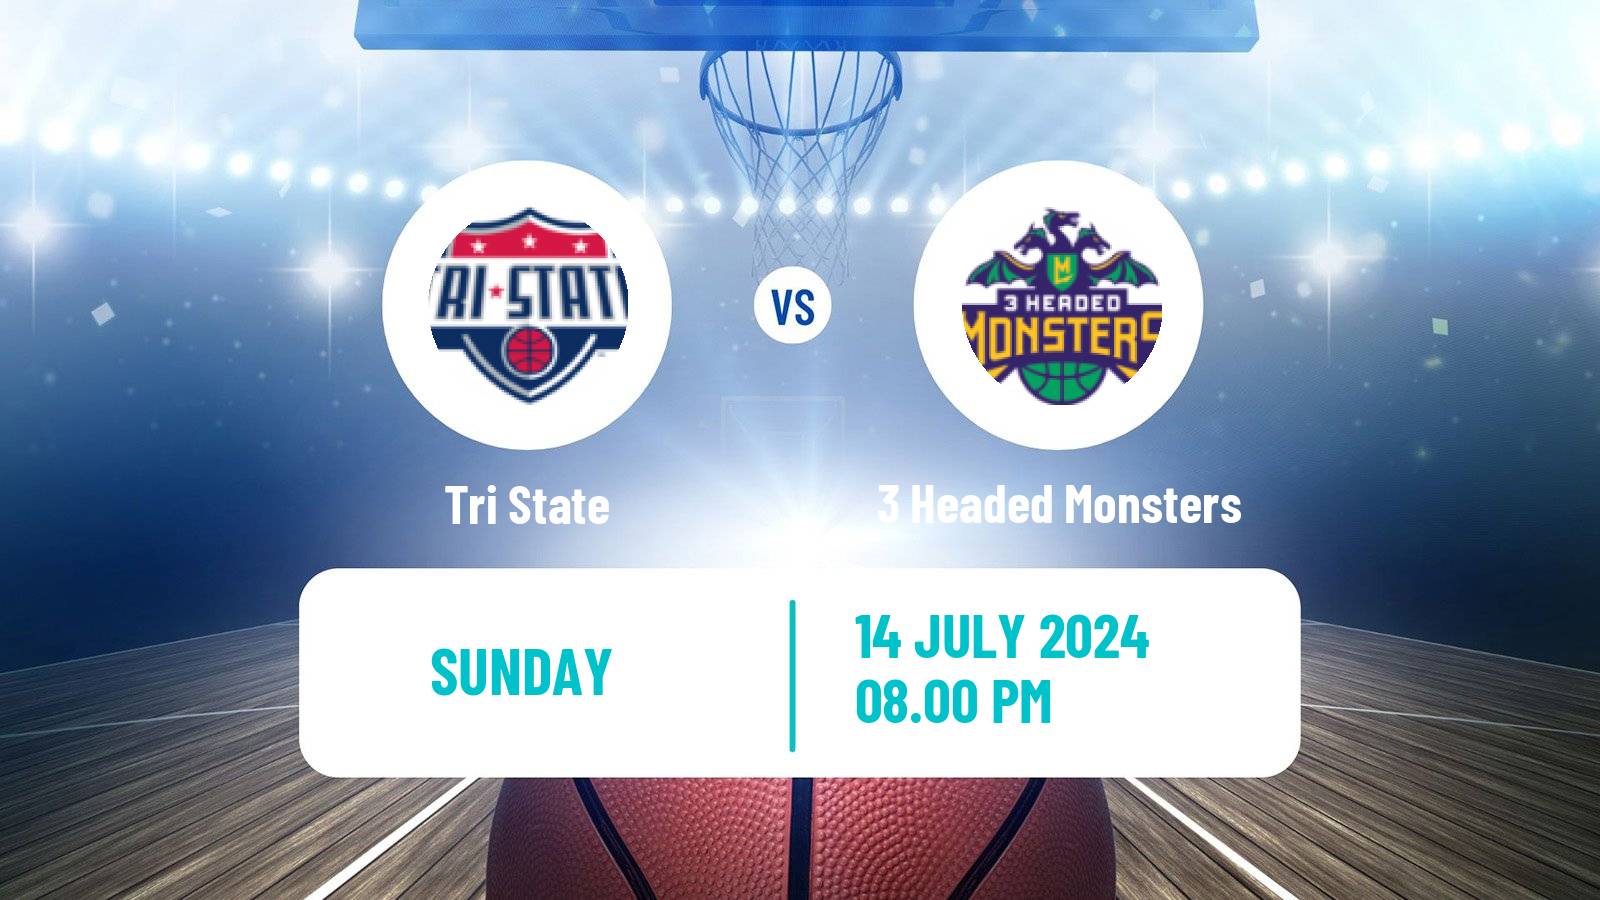 Basketball BIG3 3x3 Tri State - 3 Headed Monsters